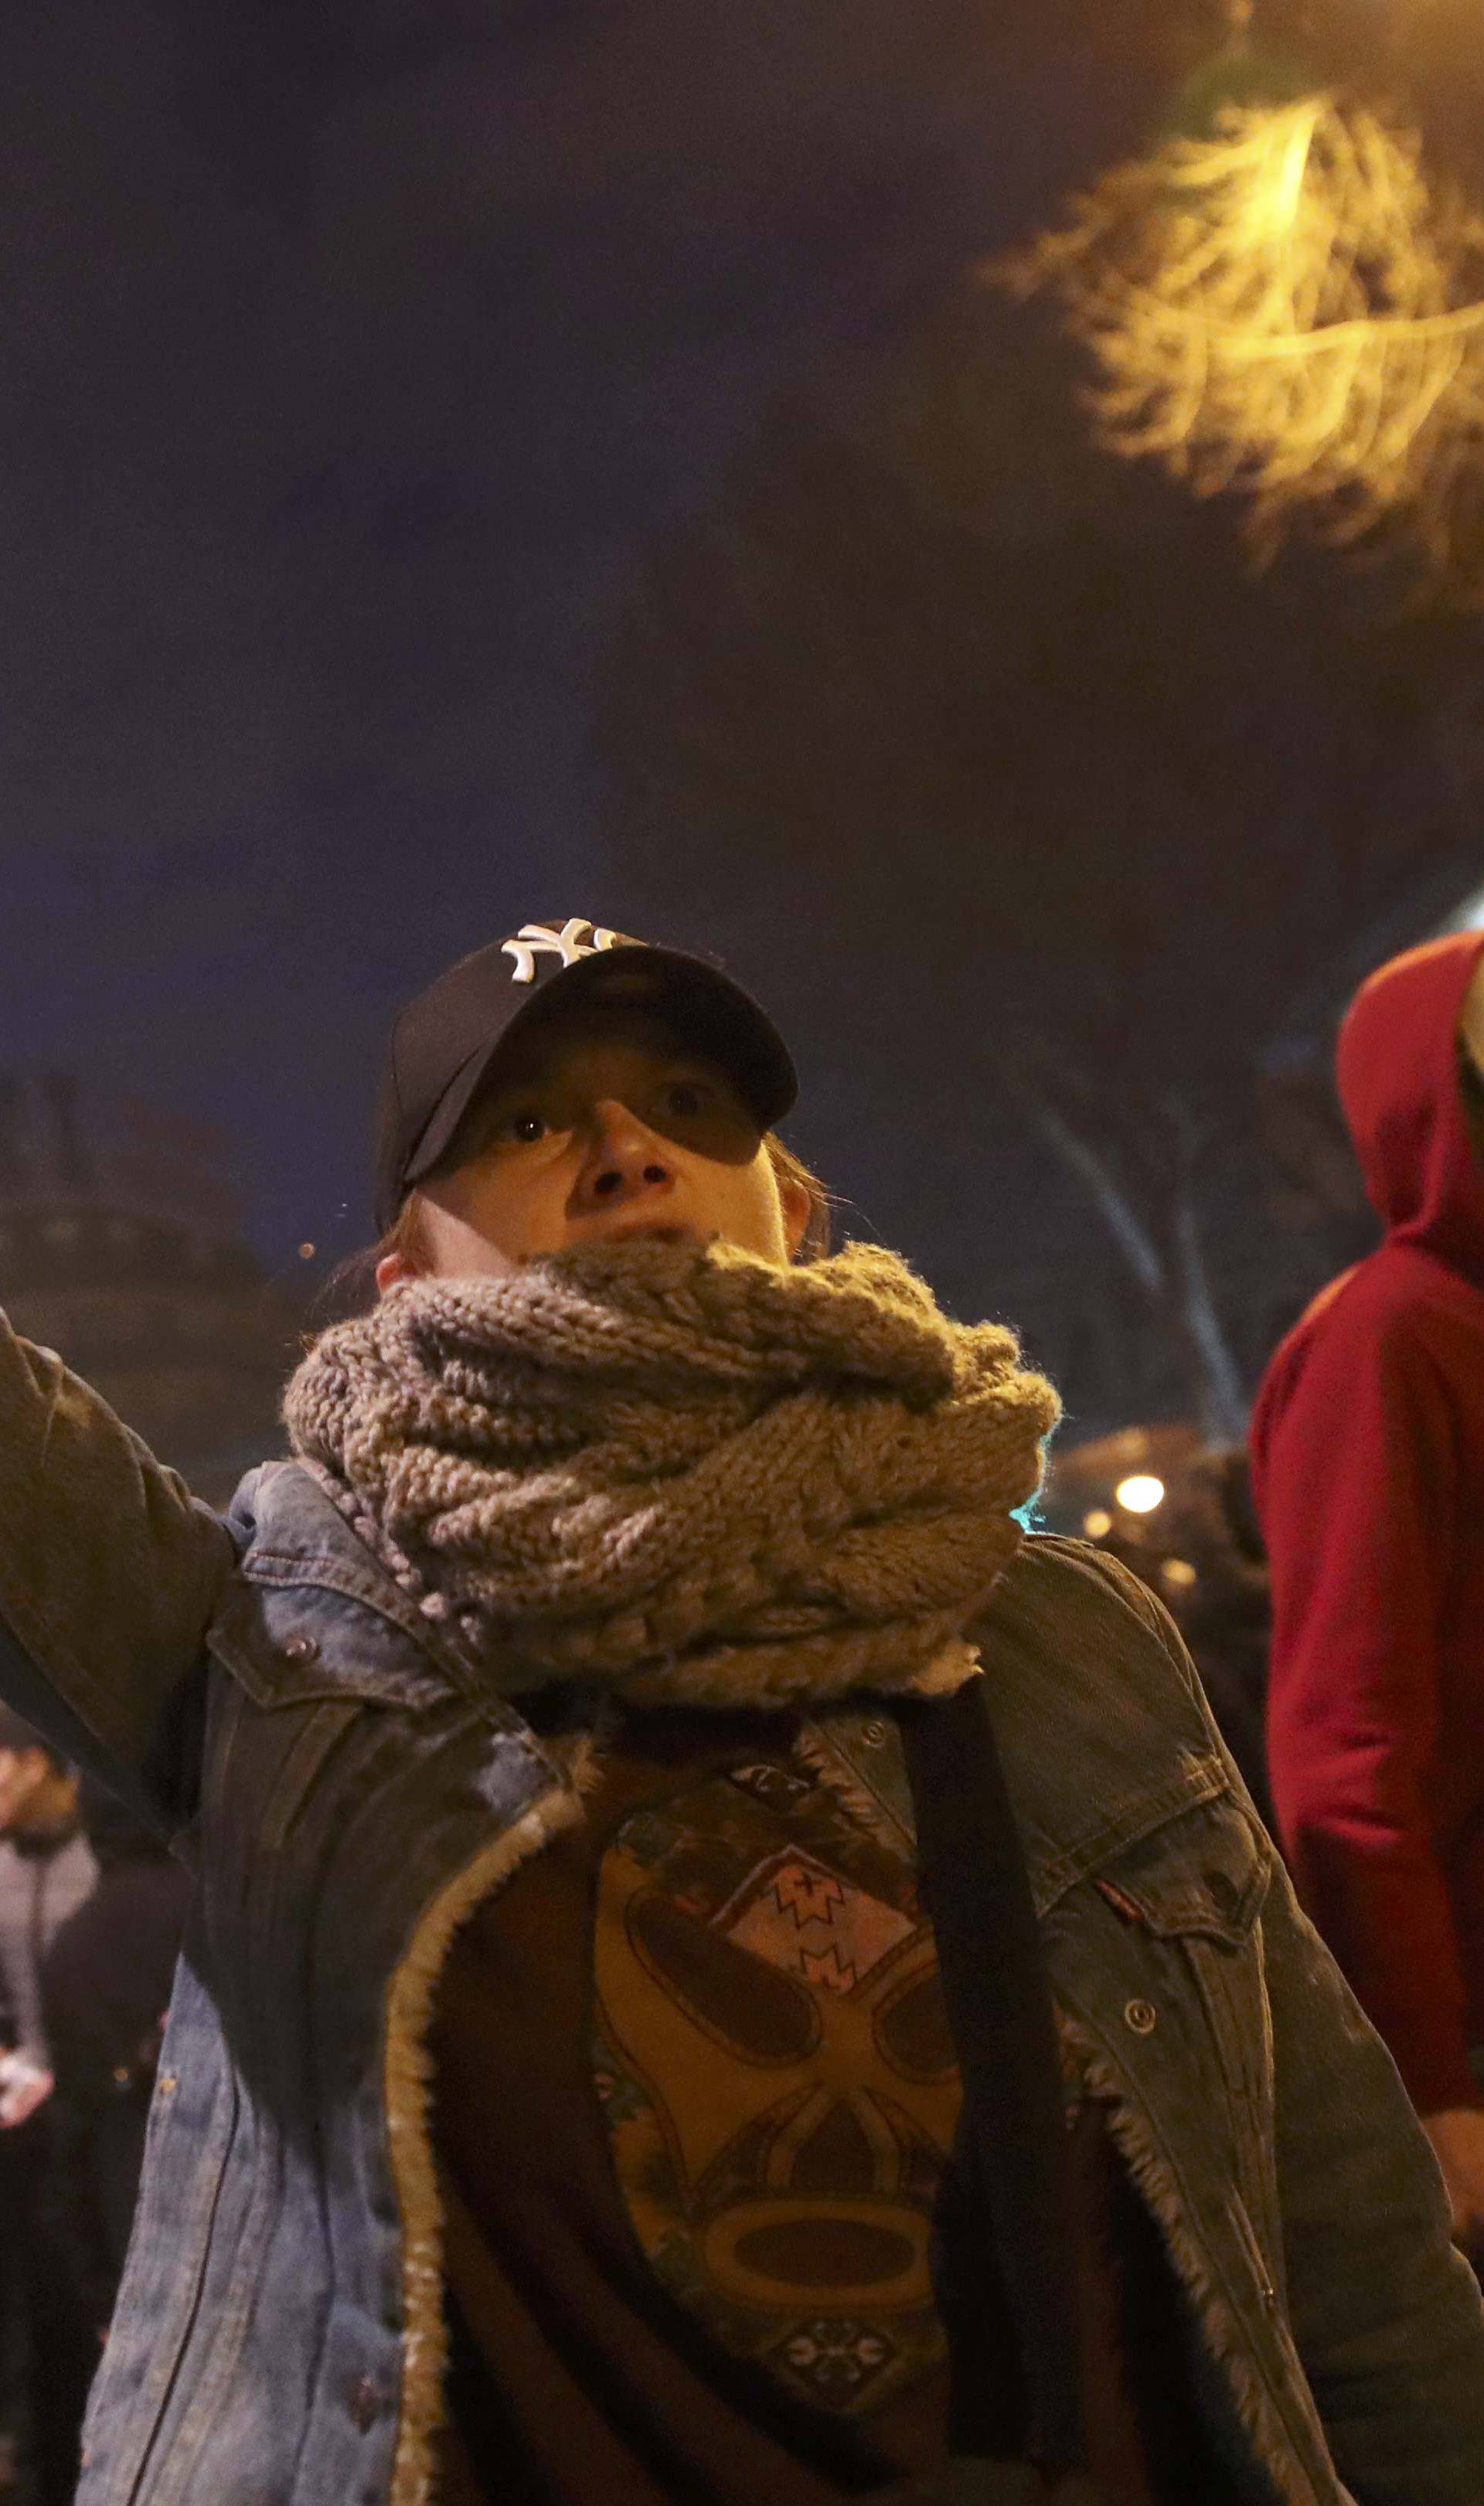  A man reacts at a protest against police brutality after a young black man, 22-year-old youth worker named Theo, was severly injured during his arrest, as people gather at a demonstration in Paris 